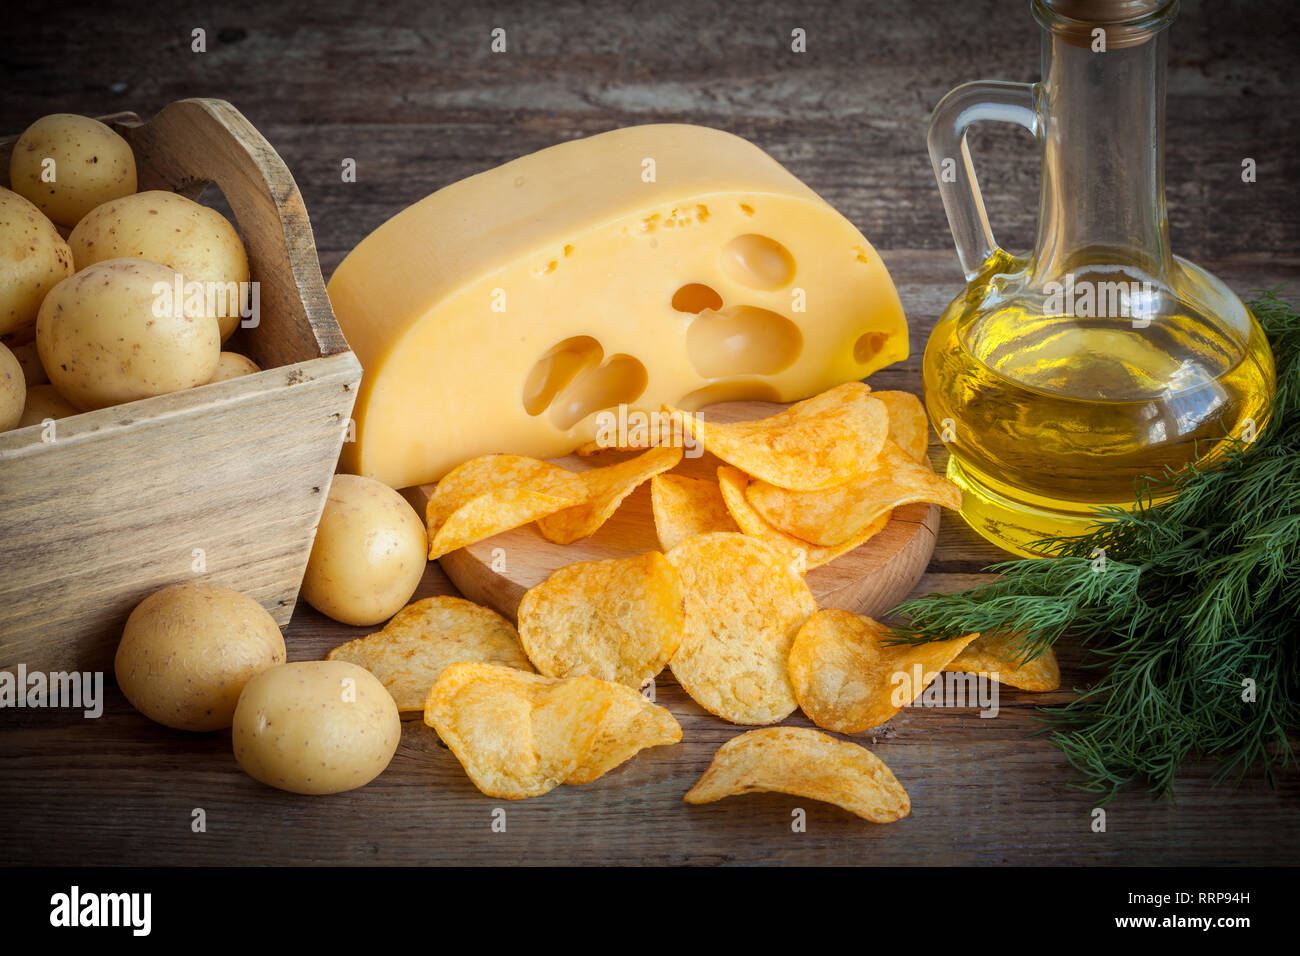 Crispy potato chips with cheese, potatoes in wooden box and oil for frying on kitchen table. Stock Photo